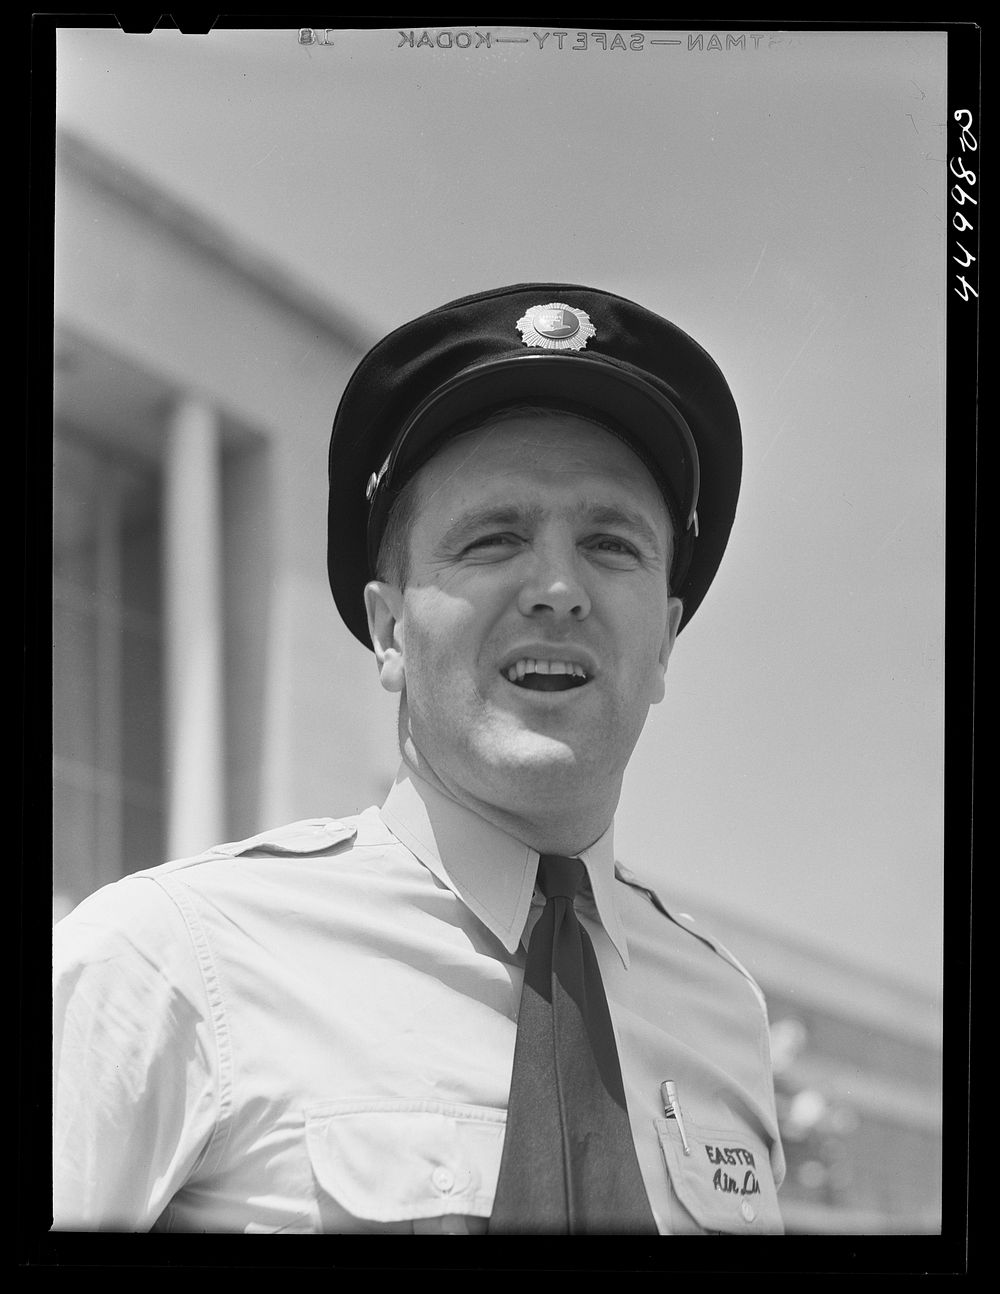 A dispatcher. Washington, D.C. municipal airport. Sourced from the Library of Congress.